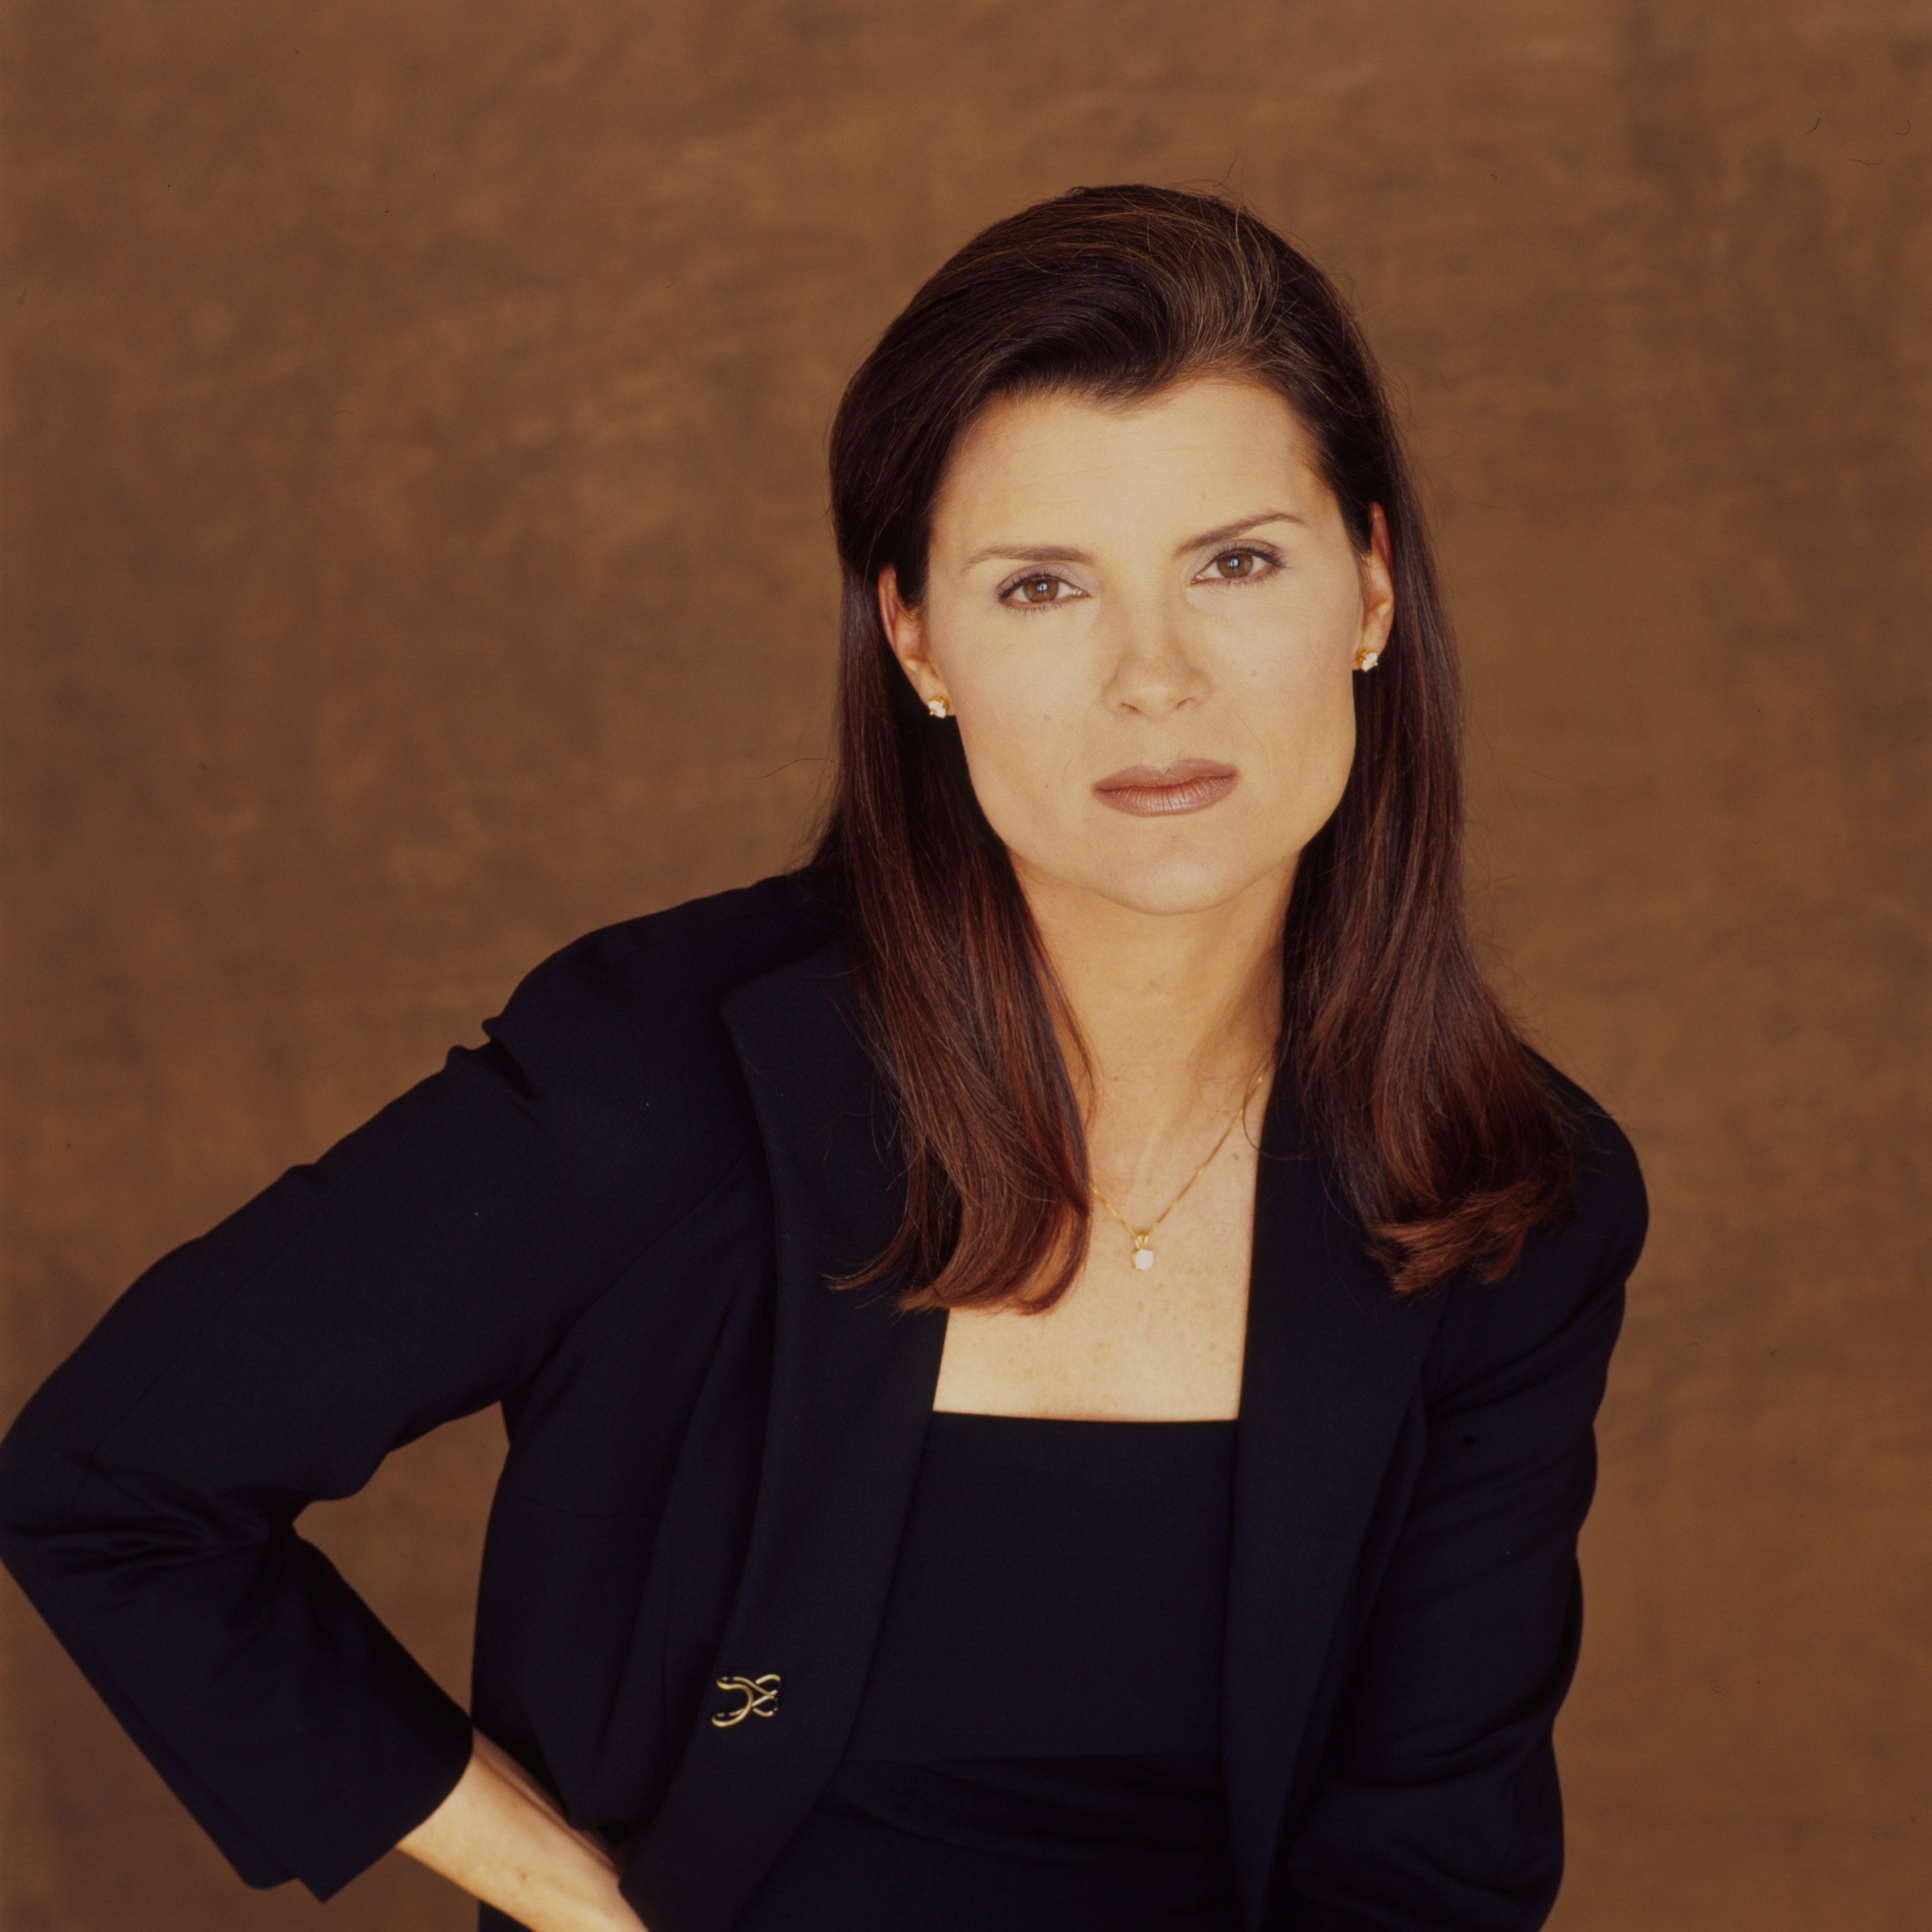 'The Bold and the Beautiful' actor Kimberlin Brown wearing a navy blue suit and posing in front of a brown backdrop.